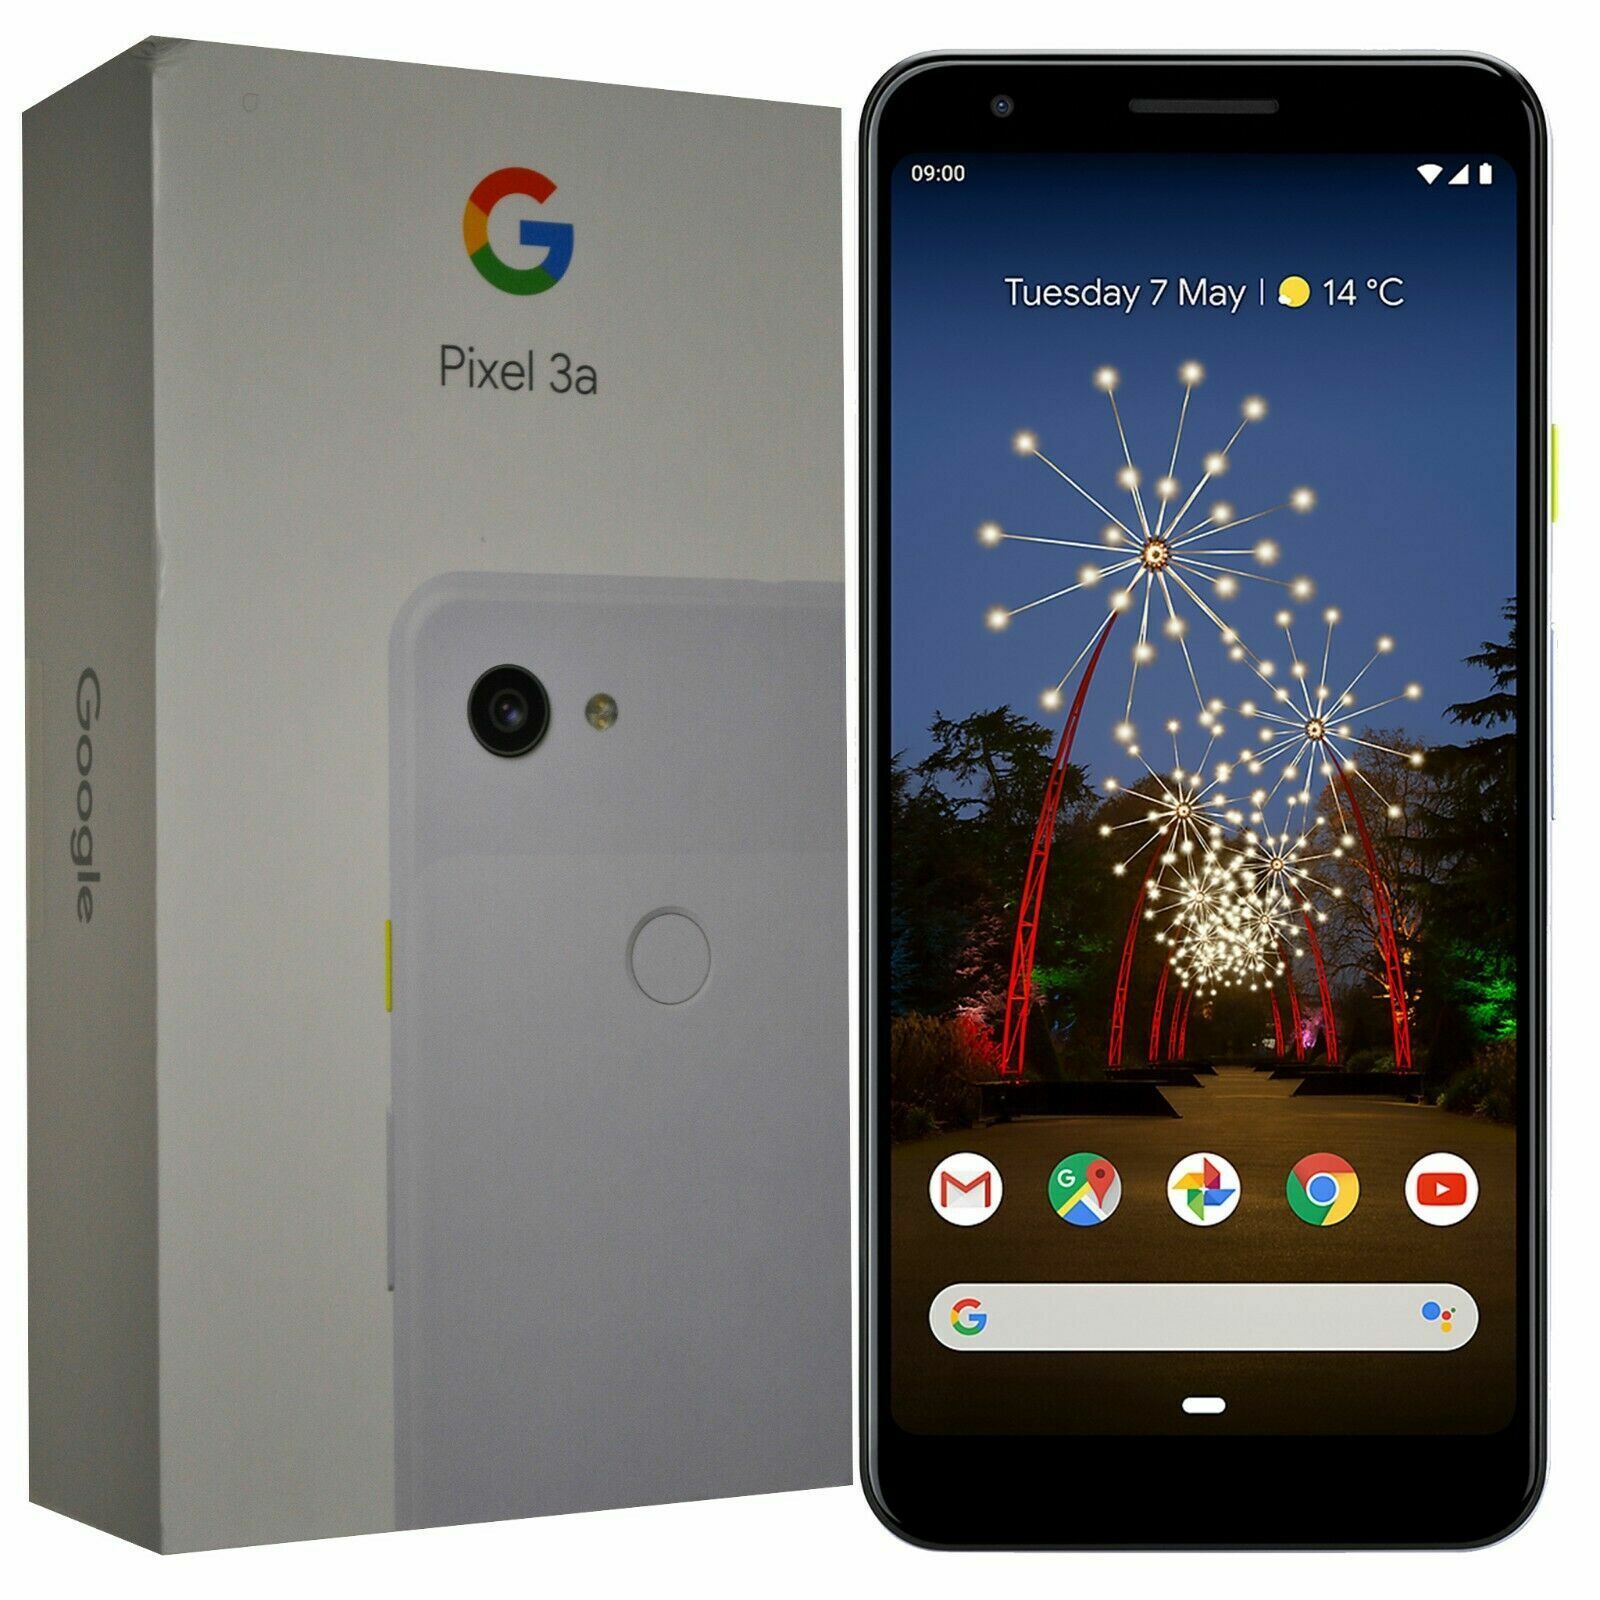 The Price of Band New Google Pixel 3A with 64GB Memory Cell phone 5.6″,4G LTE Unlocked Purple | Google Pixel Phone